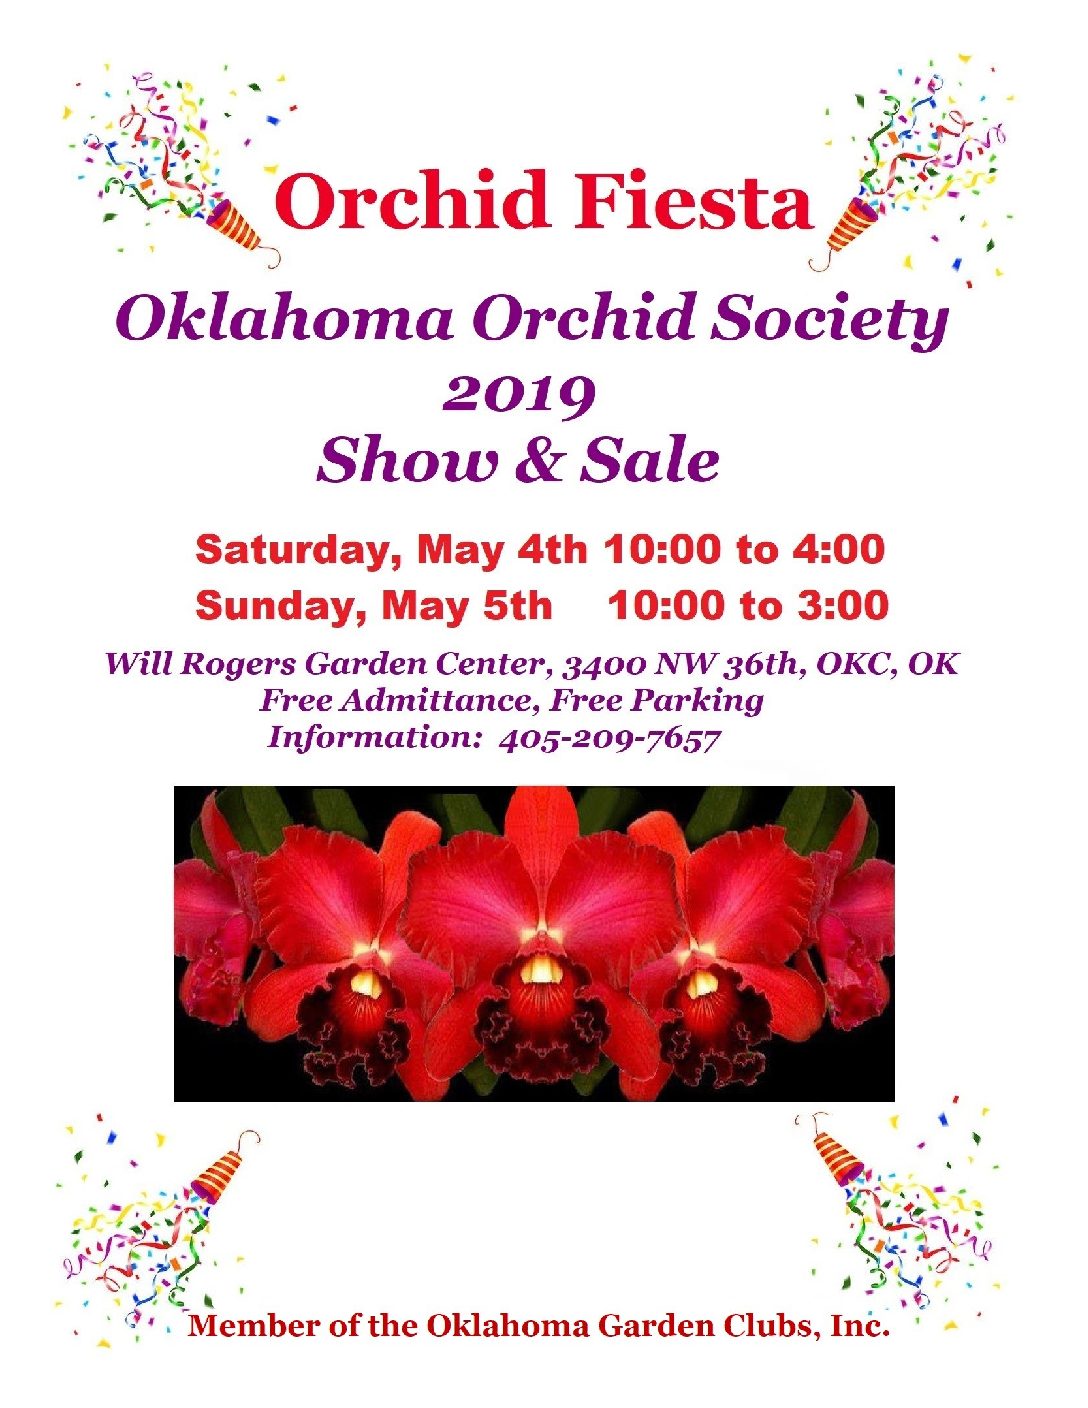 Acadian Orchid Society Show - Orchid Garden Party